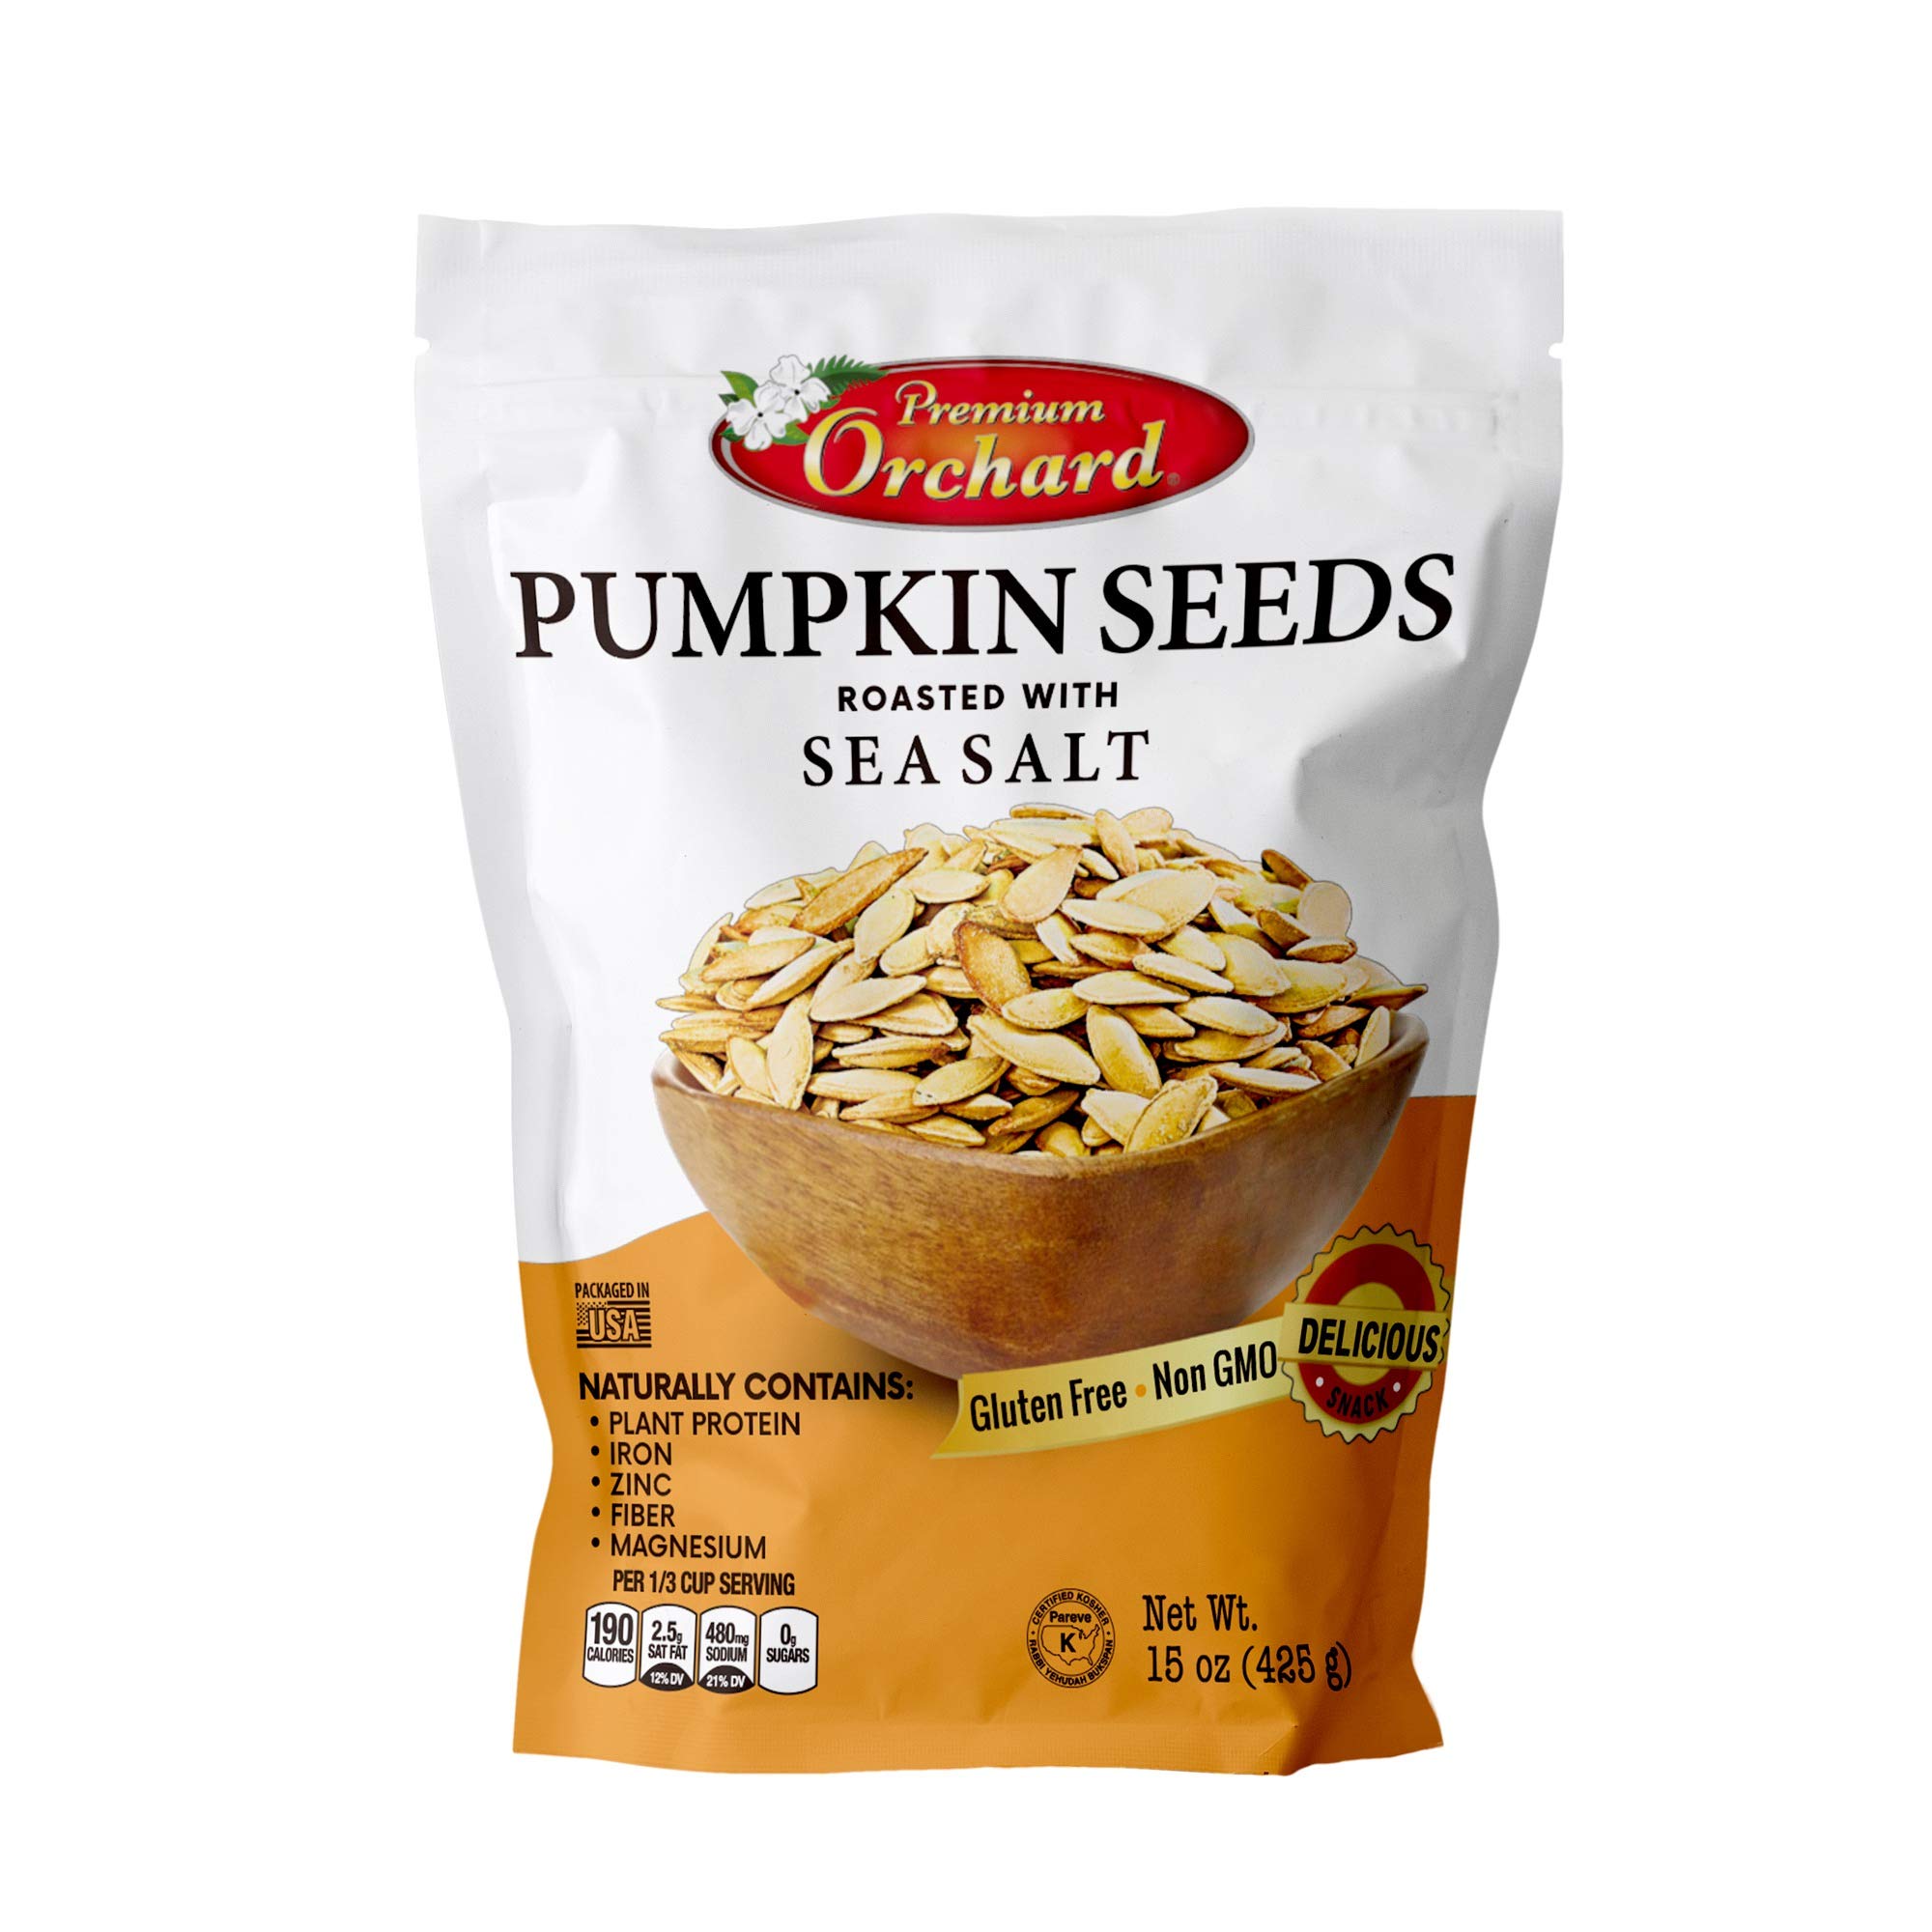 Premium Orchard Pumpkin Seeds Oven Roasted with Sea Salt (1 Bag) by PREMIUM ORcHARD